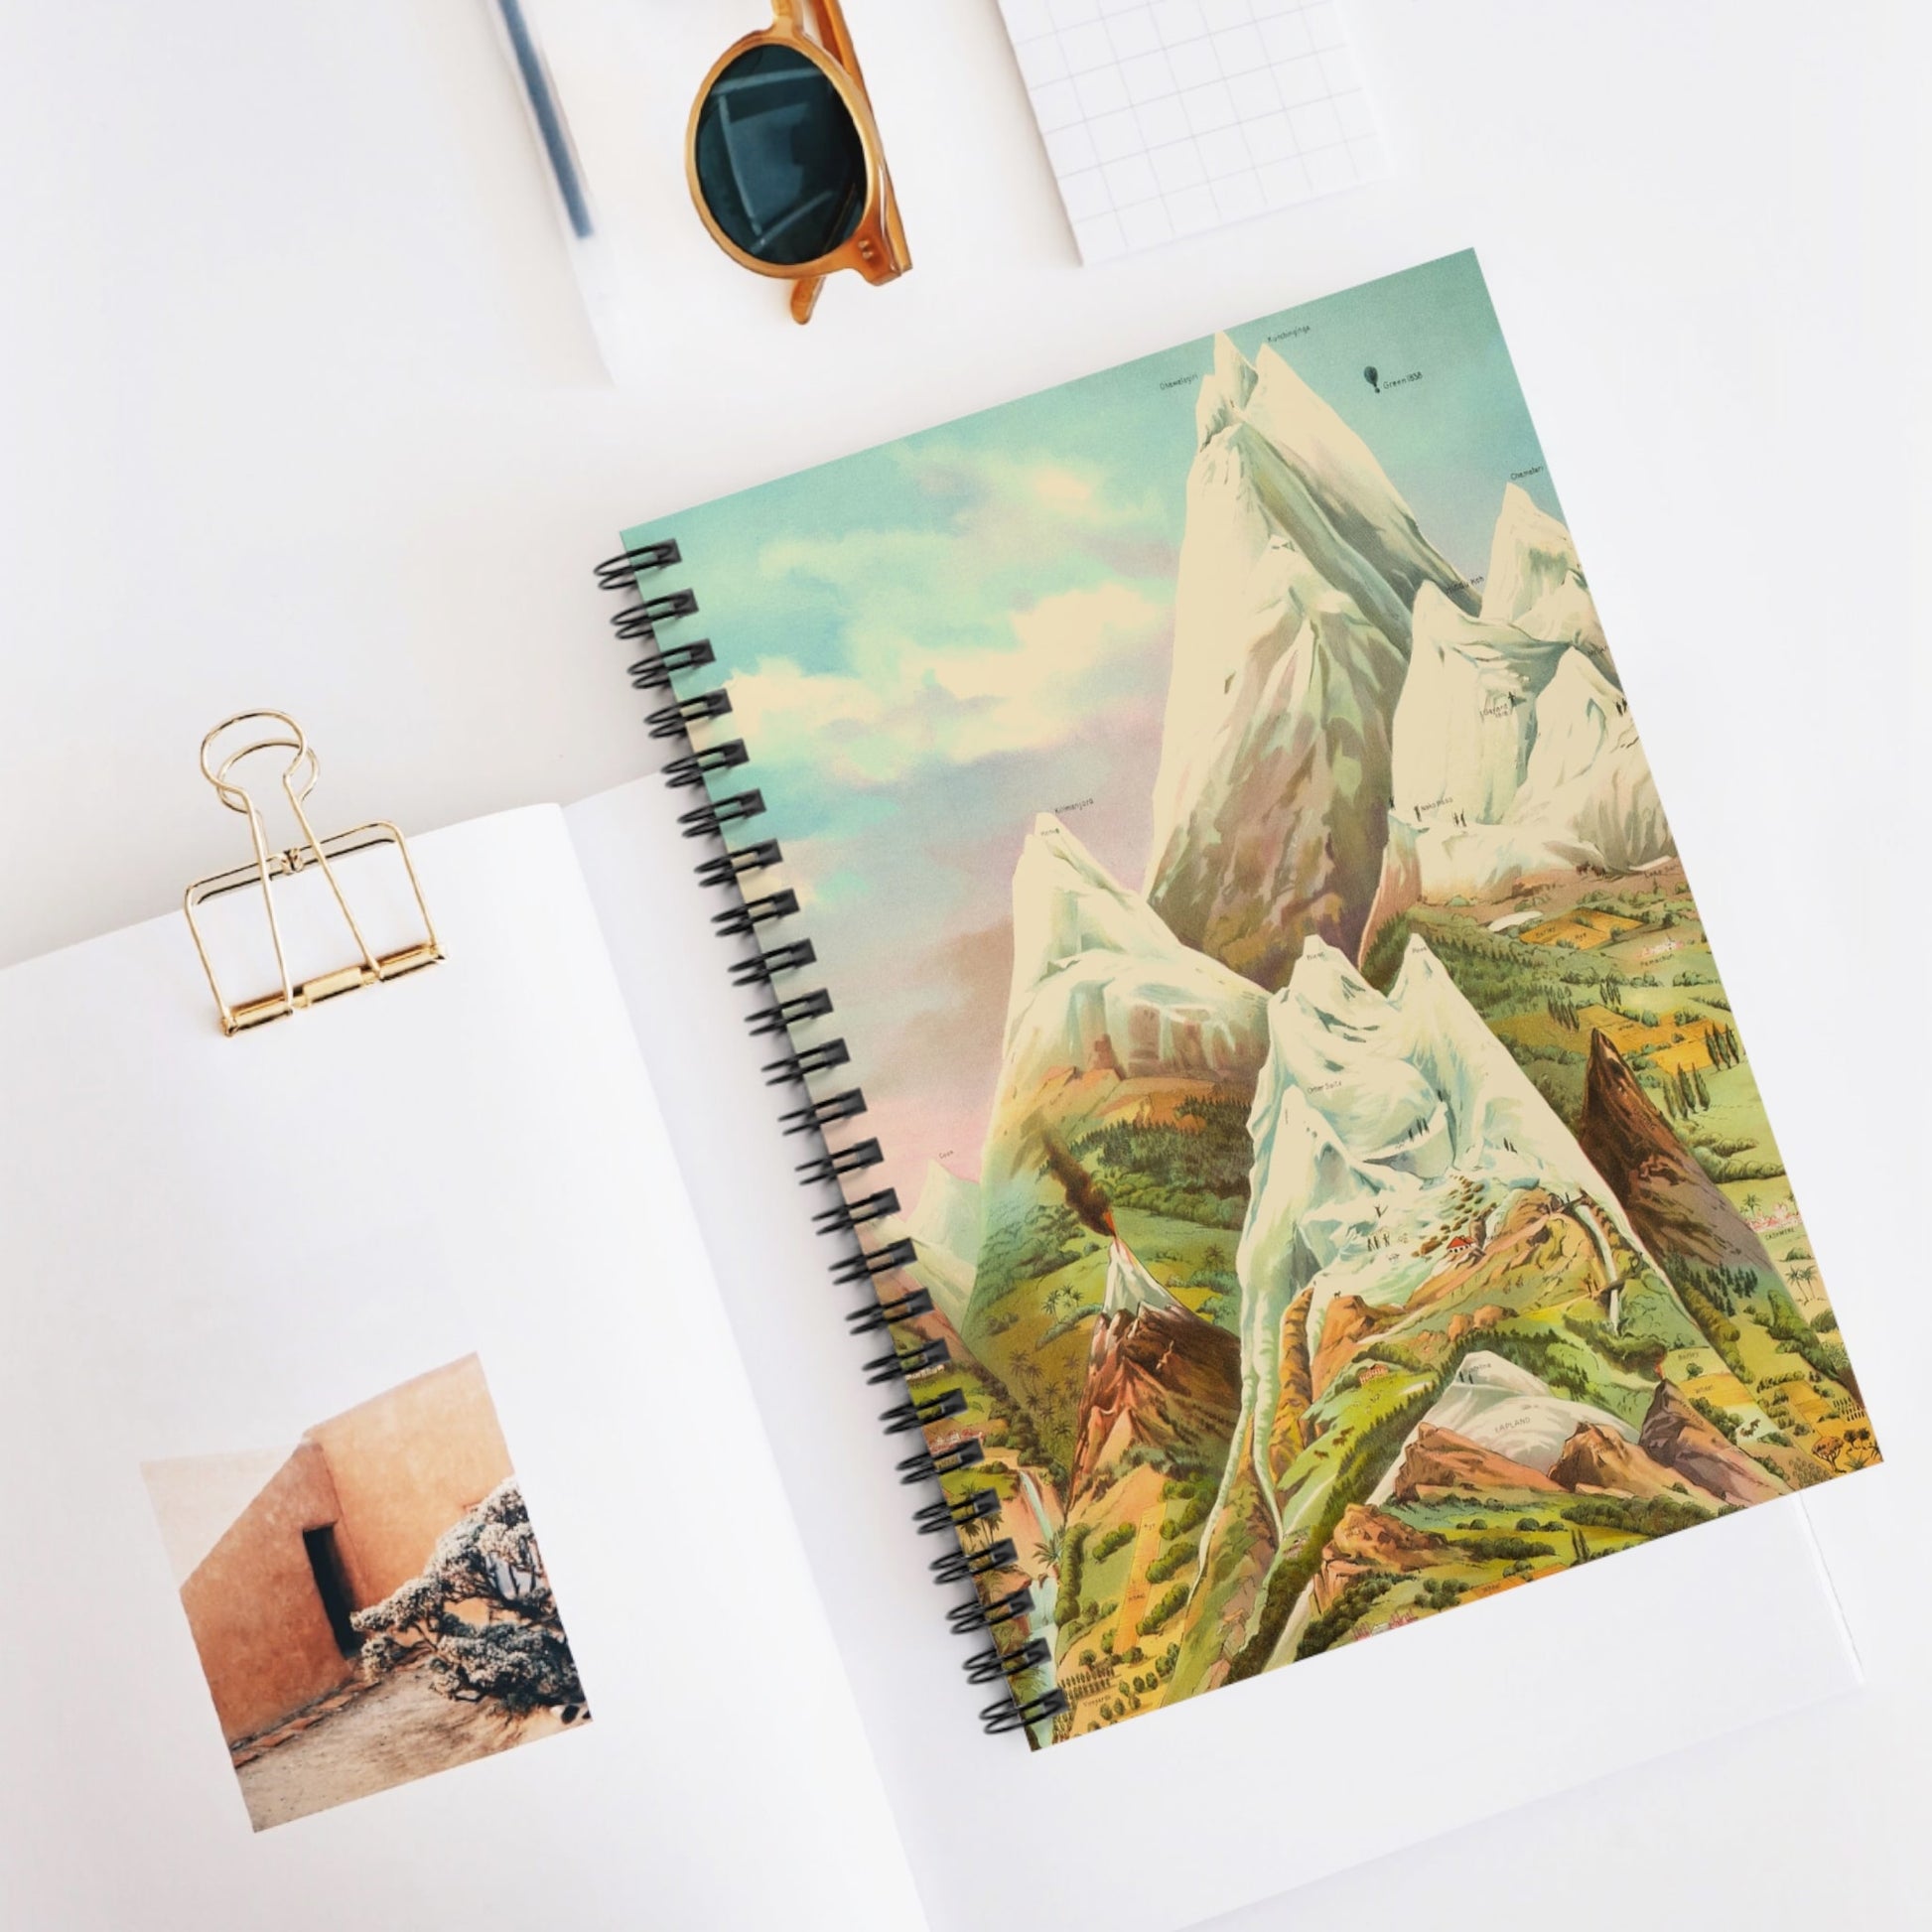 Cool Mountain Painting Spiral Notebook Displayed on Desk